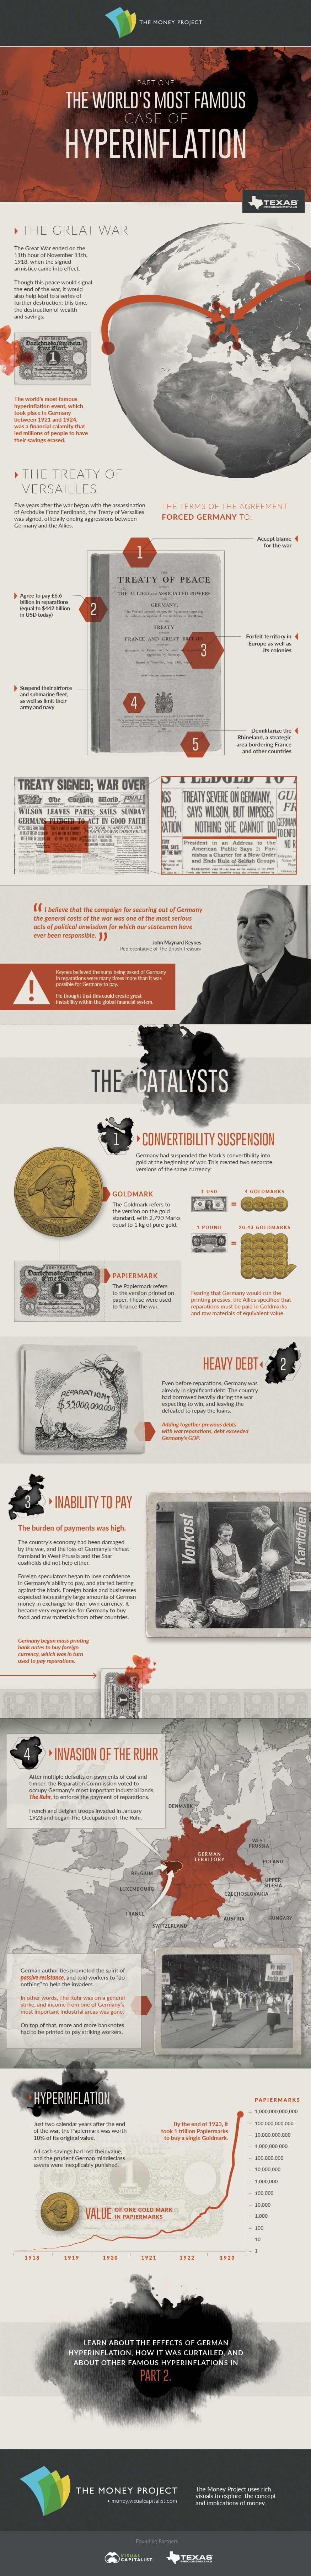 The World's Most Famous Case of Hyperinflation (Part 1 of 2)